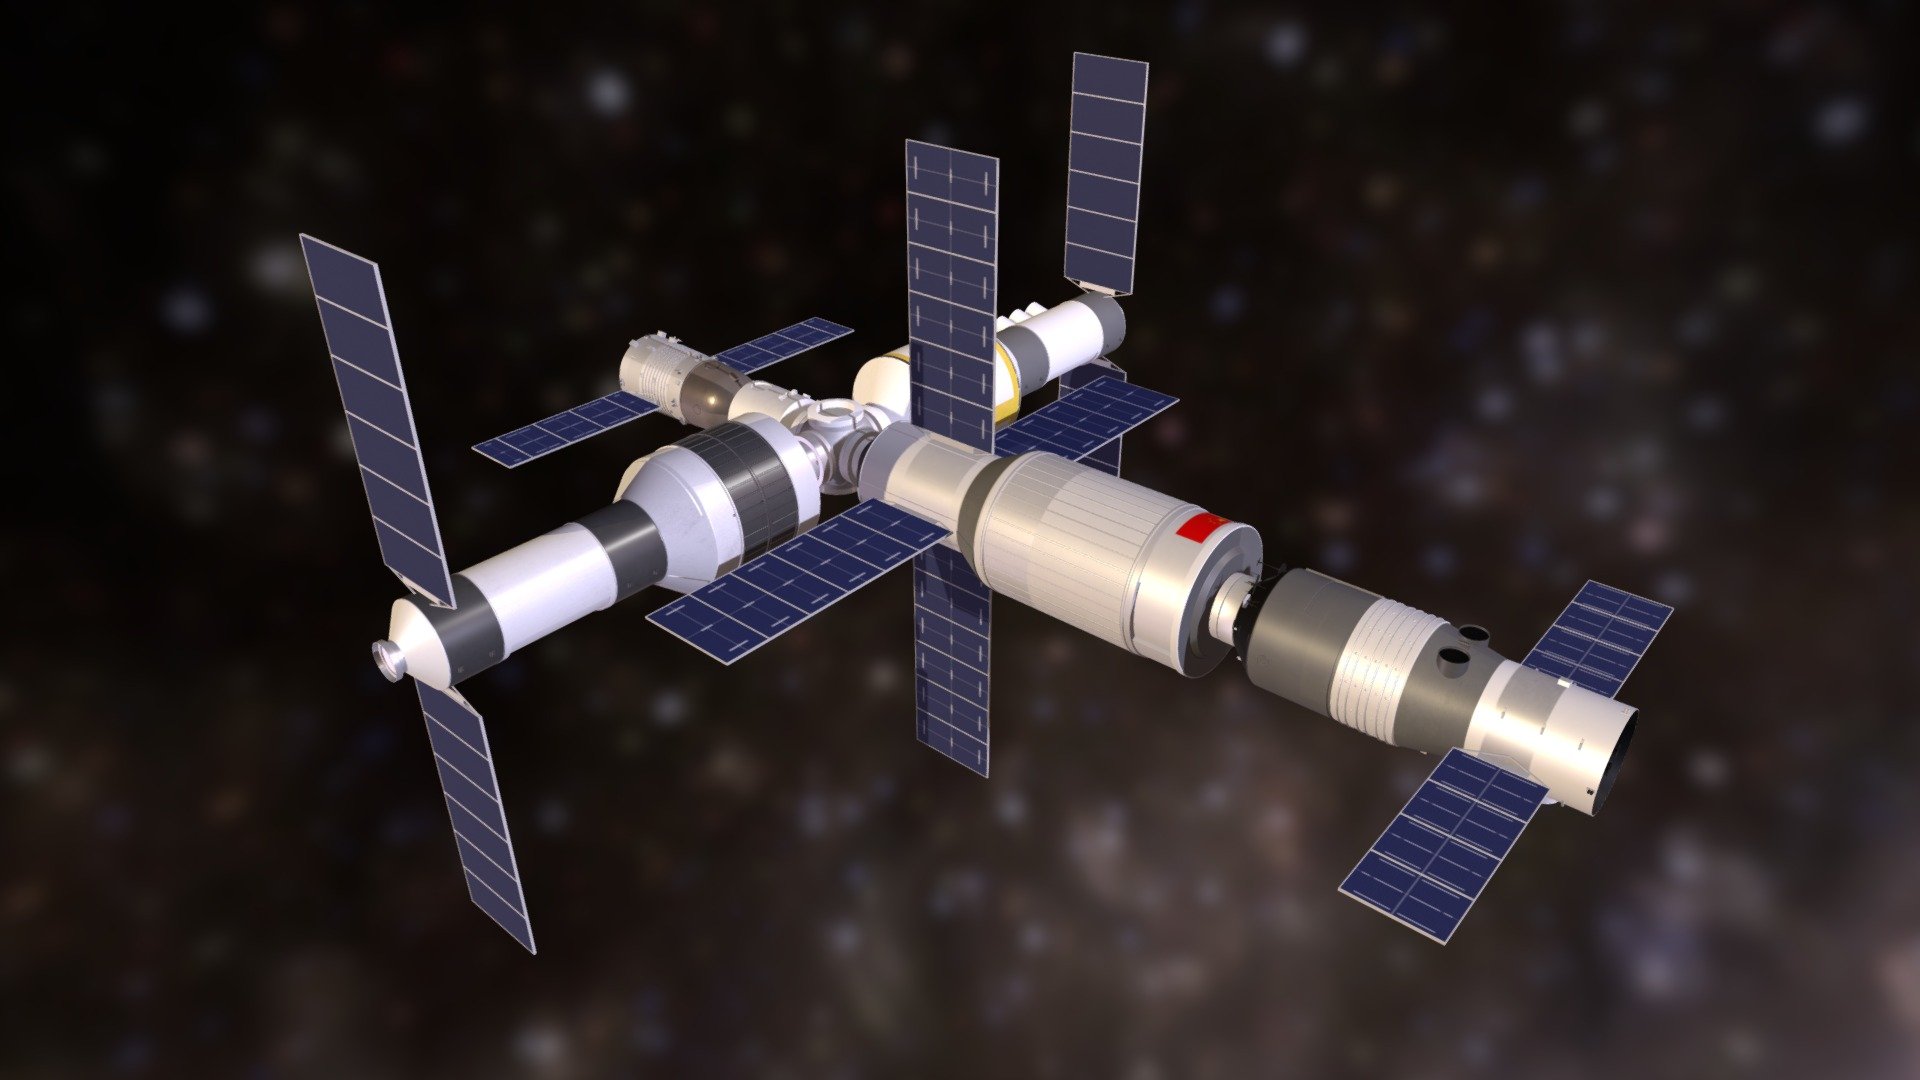 Artist’s rendition of the planned Chinese Space Station

China seeks to enhance its capacity for scientific and technological innovation by building a large modular space station. China’s leaders also hope that research conducted onboard the station will support their long-term goals for space exploration, including missions to the Moon and Mars.

This model draws from currently available information. When completed, the station’s basic configuration will feature a core module and two experiment modules permanently docked opposite each other in a T-shape structure.

Click to learn more  http://chinapower.csis.org/chinese-space-station/ - Planned Chinese Space Station - 3D model by CSIS 3d model